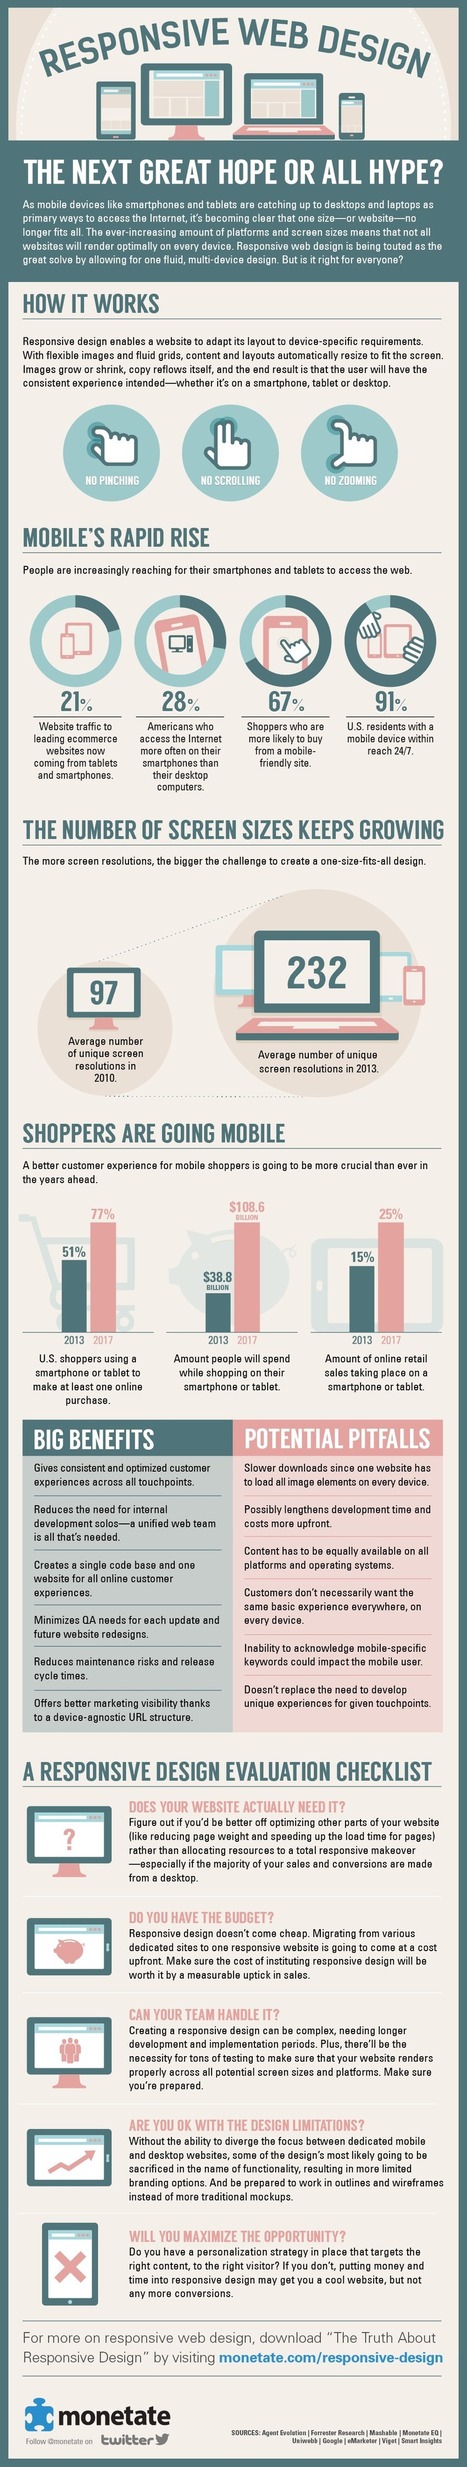 Infographic: responsive design for multiple devices - The Hub | The MarTech Digest | Scoop.it